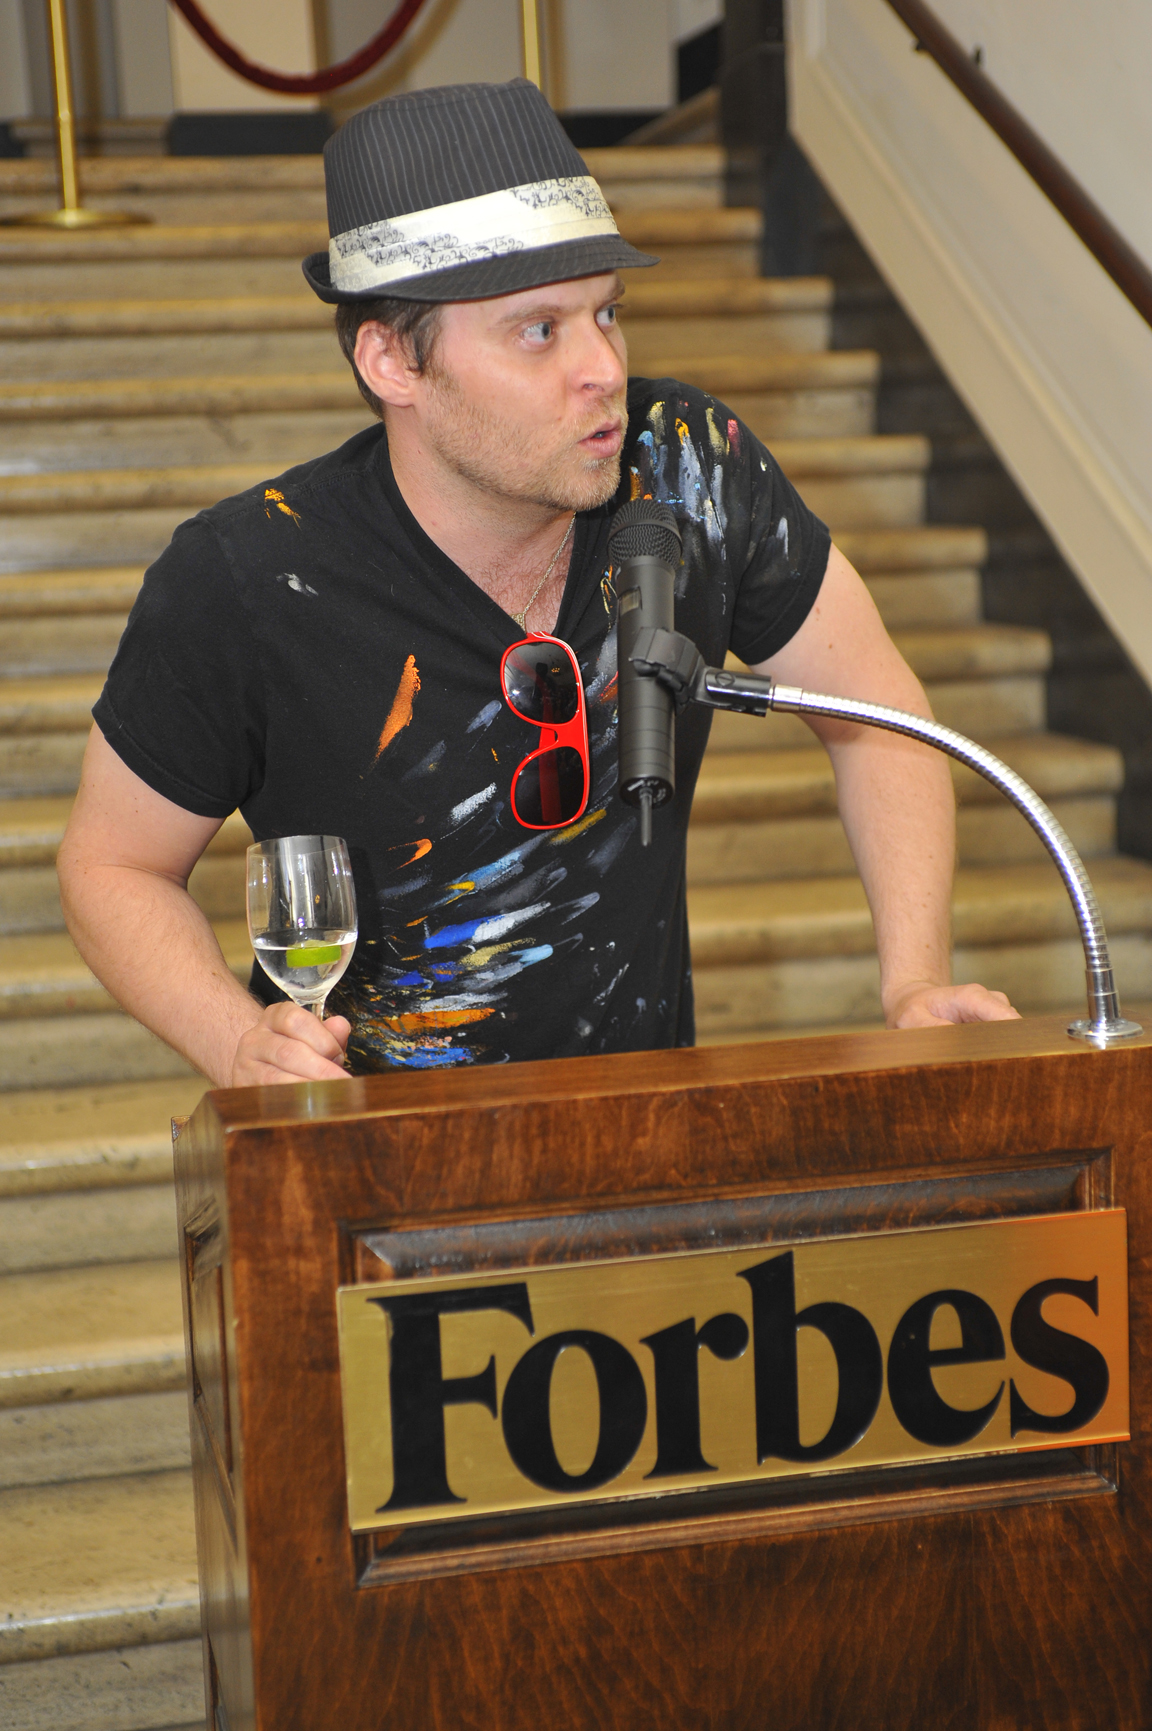 Borbay Speaking at Forbes HQ